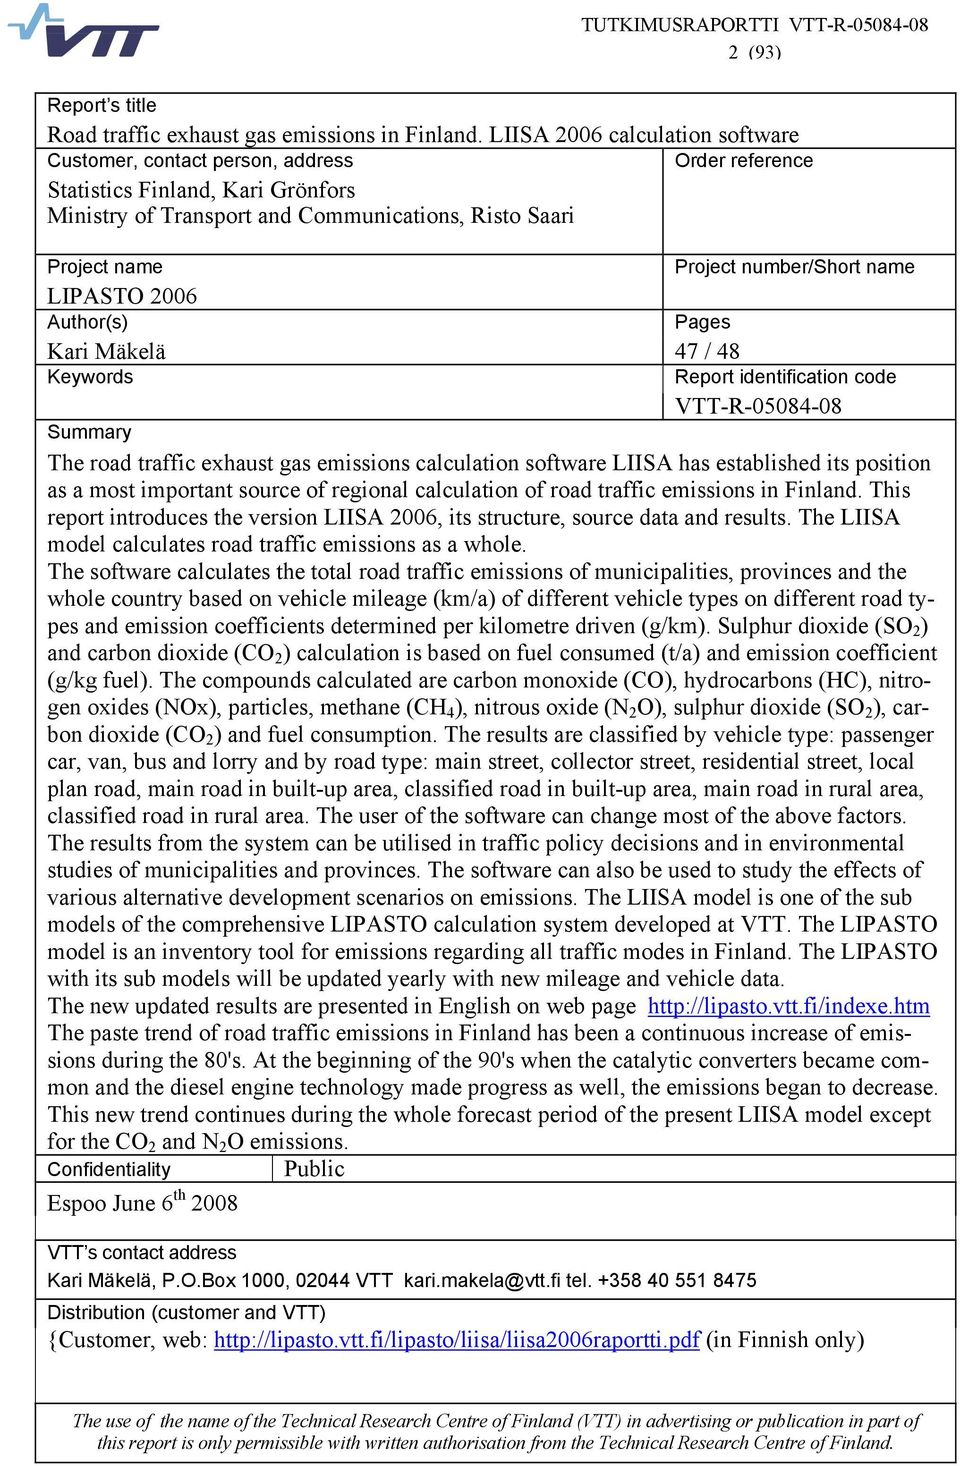 number/short name LIPASTO 2006 Author(s) Pages Kari Mäkelä 47 / 48 Keywords Report identification code VTT-R-05084-08 Summary The road traffic exhaust gas emissions calculation software LIISA has